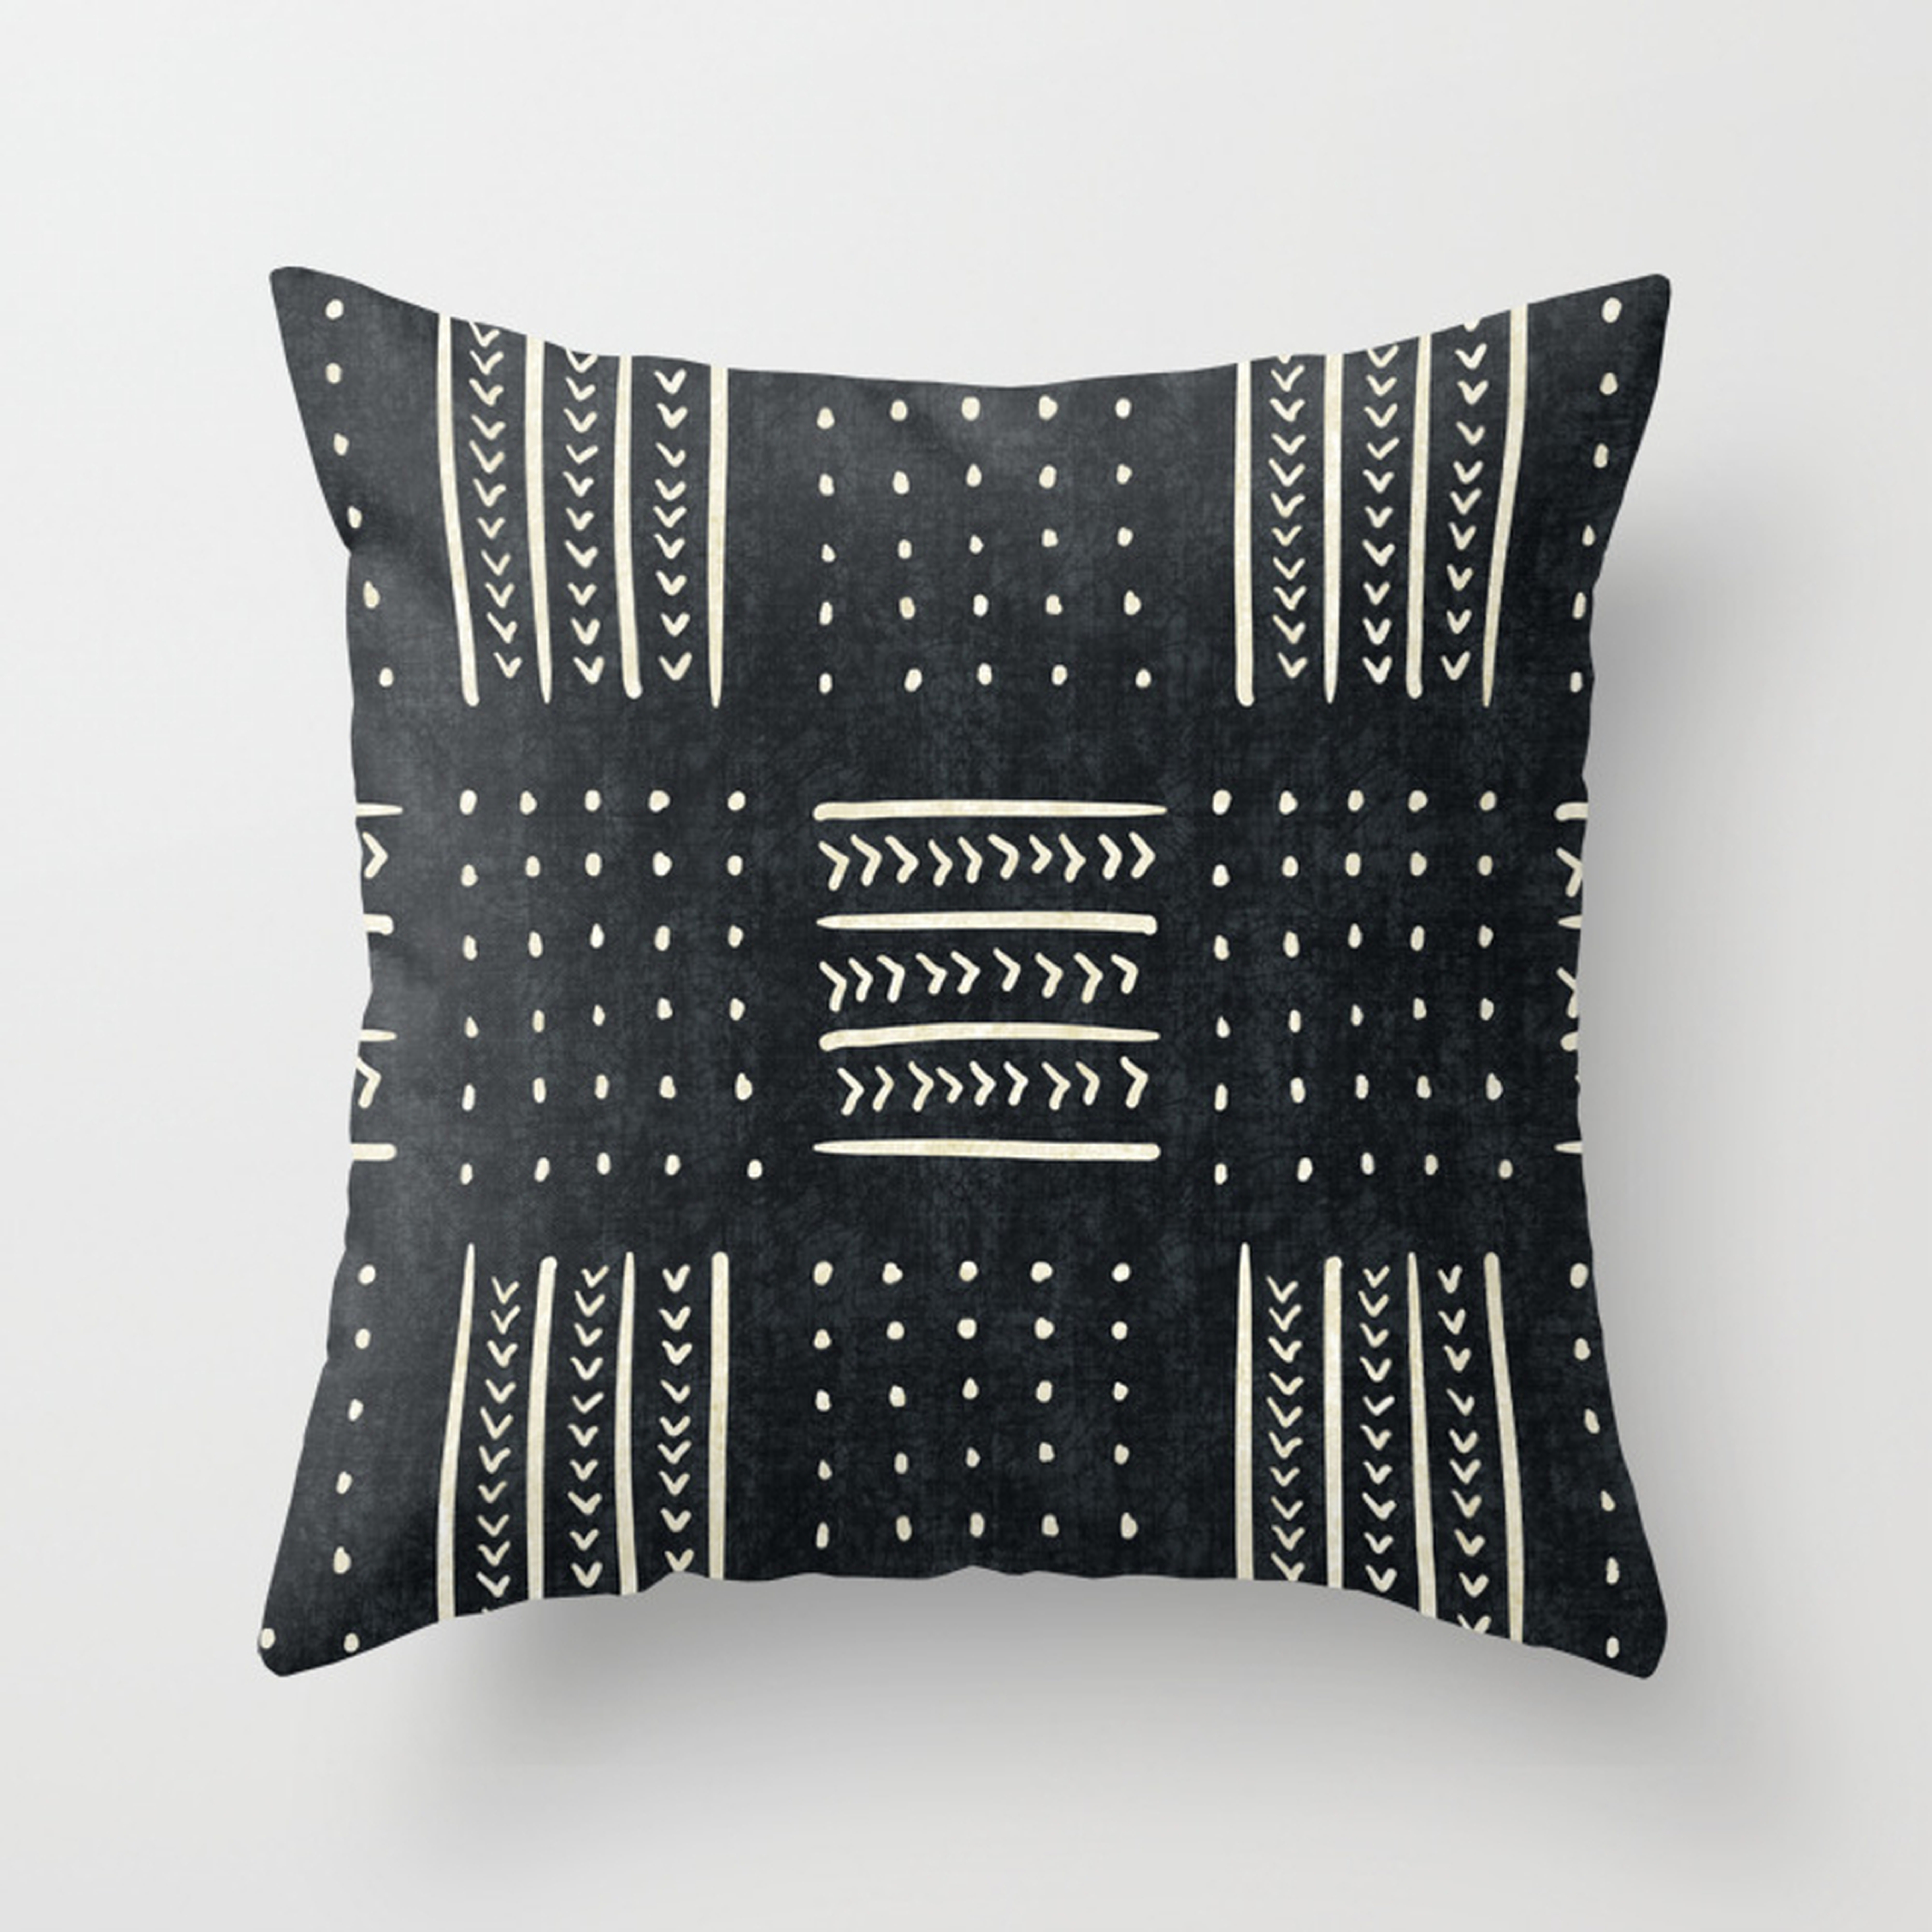 Patchwork Geo In Black And White Throw Pillow by House Of Haha - Cover (18" x 18") With Pillow Insert - Outdoor Pillow - Society6